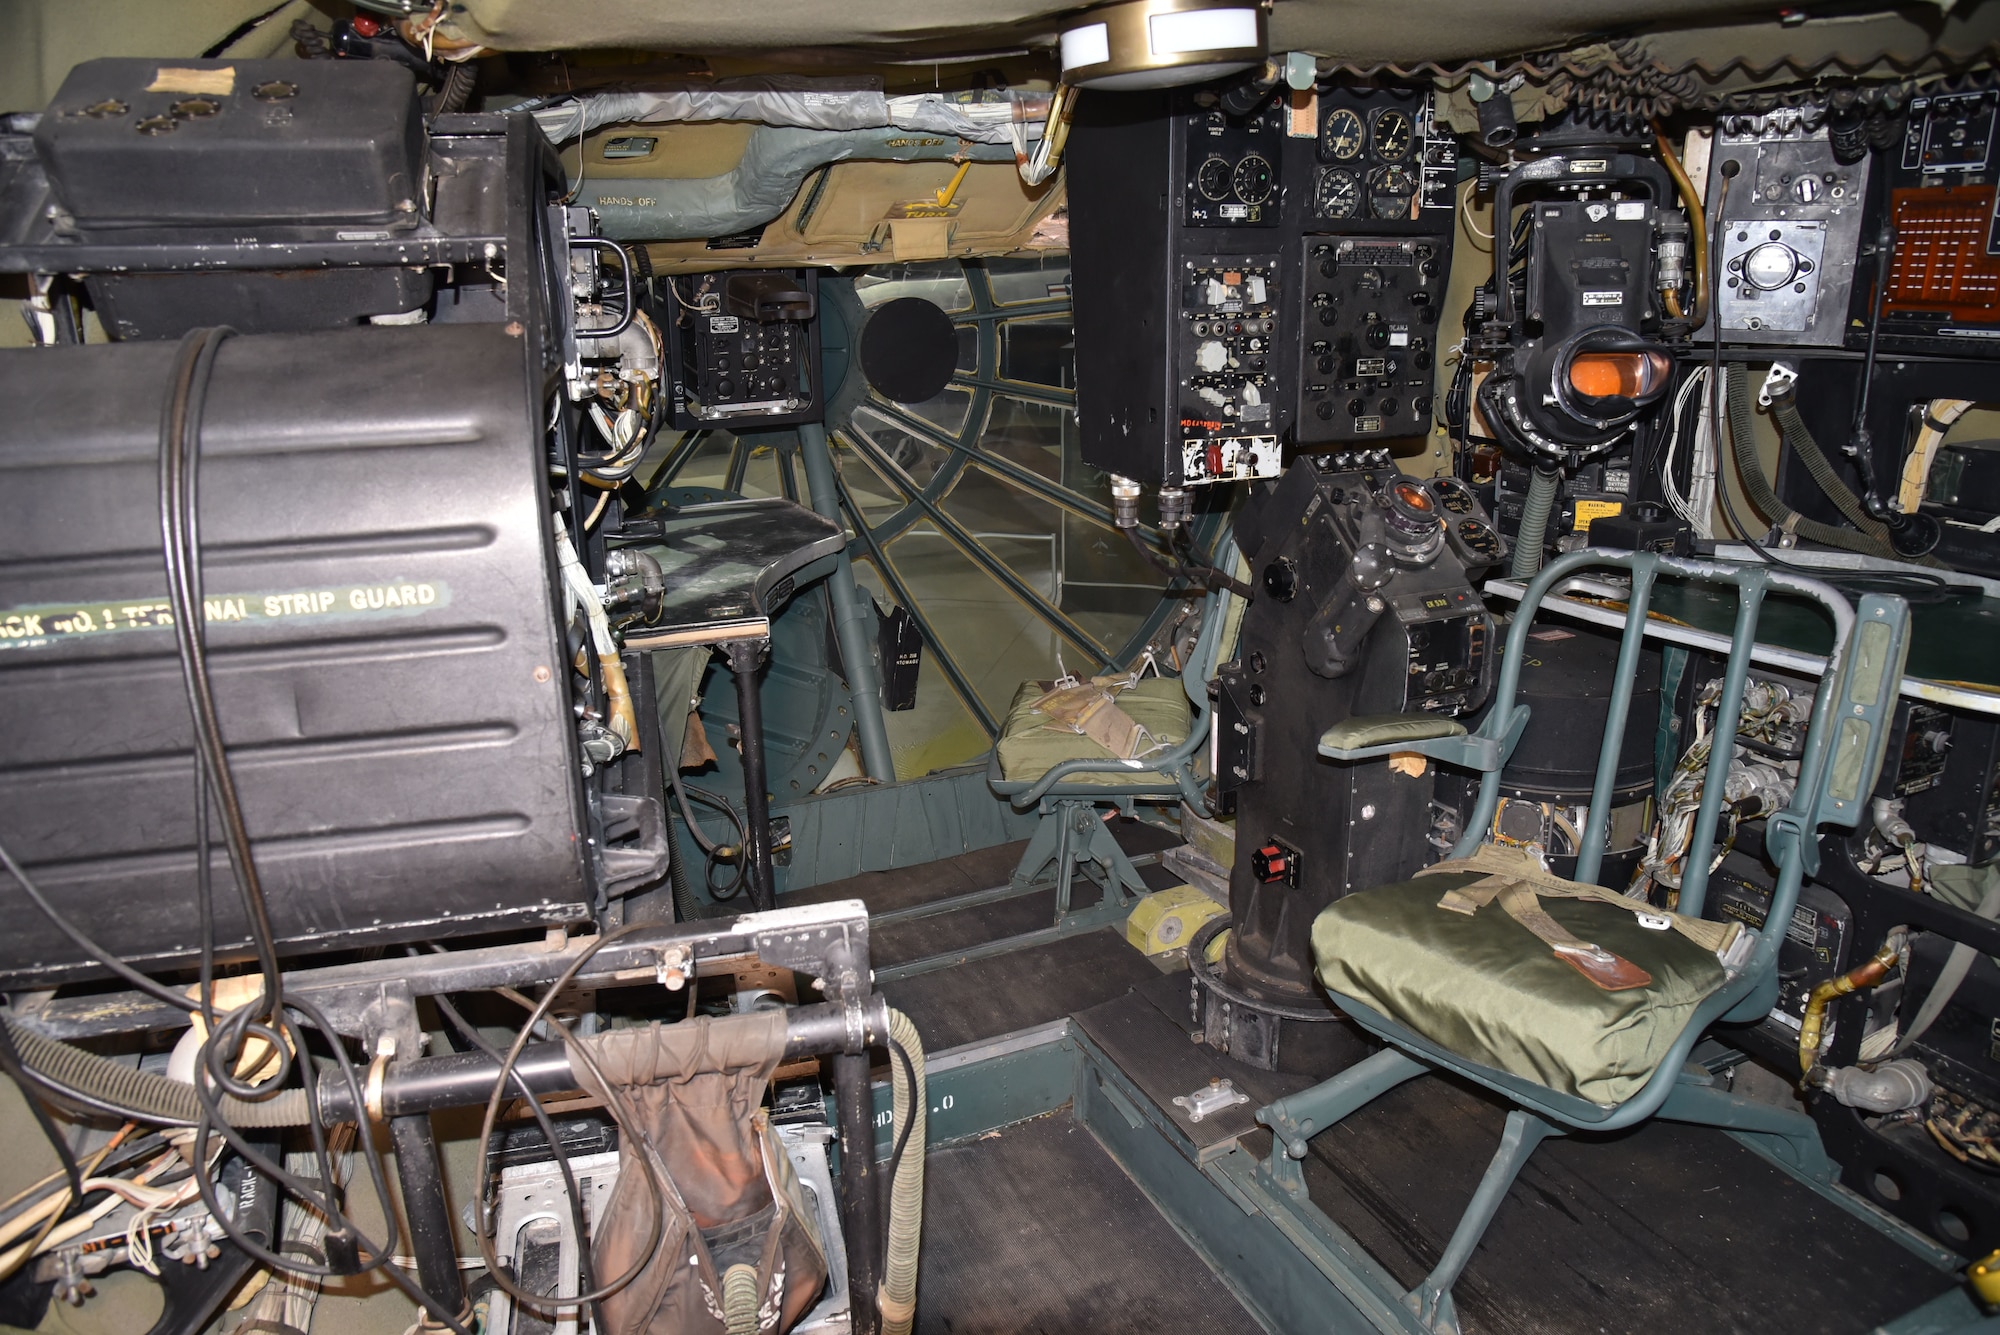 DAYTON, Ohio - Convair B-36J Peacemaker instrument components in the radar/navigator station at the National Museum of the U.S. Air Force. (U.S. Air Force photo by Ken LaRock)